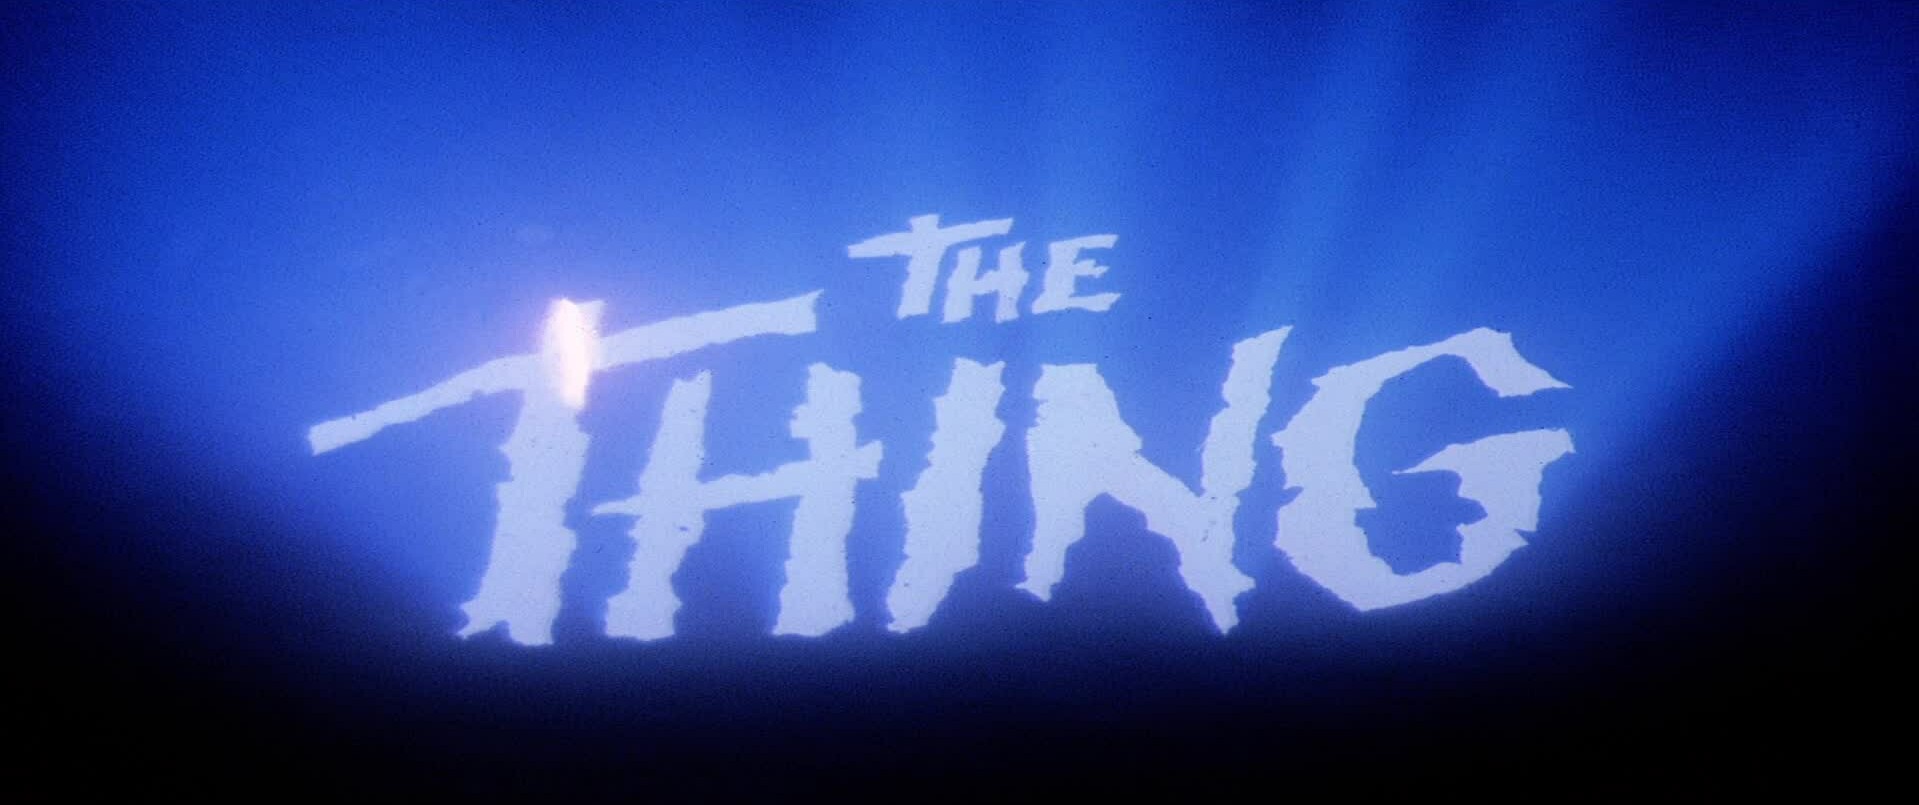 The thing надпись. This is the first thing